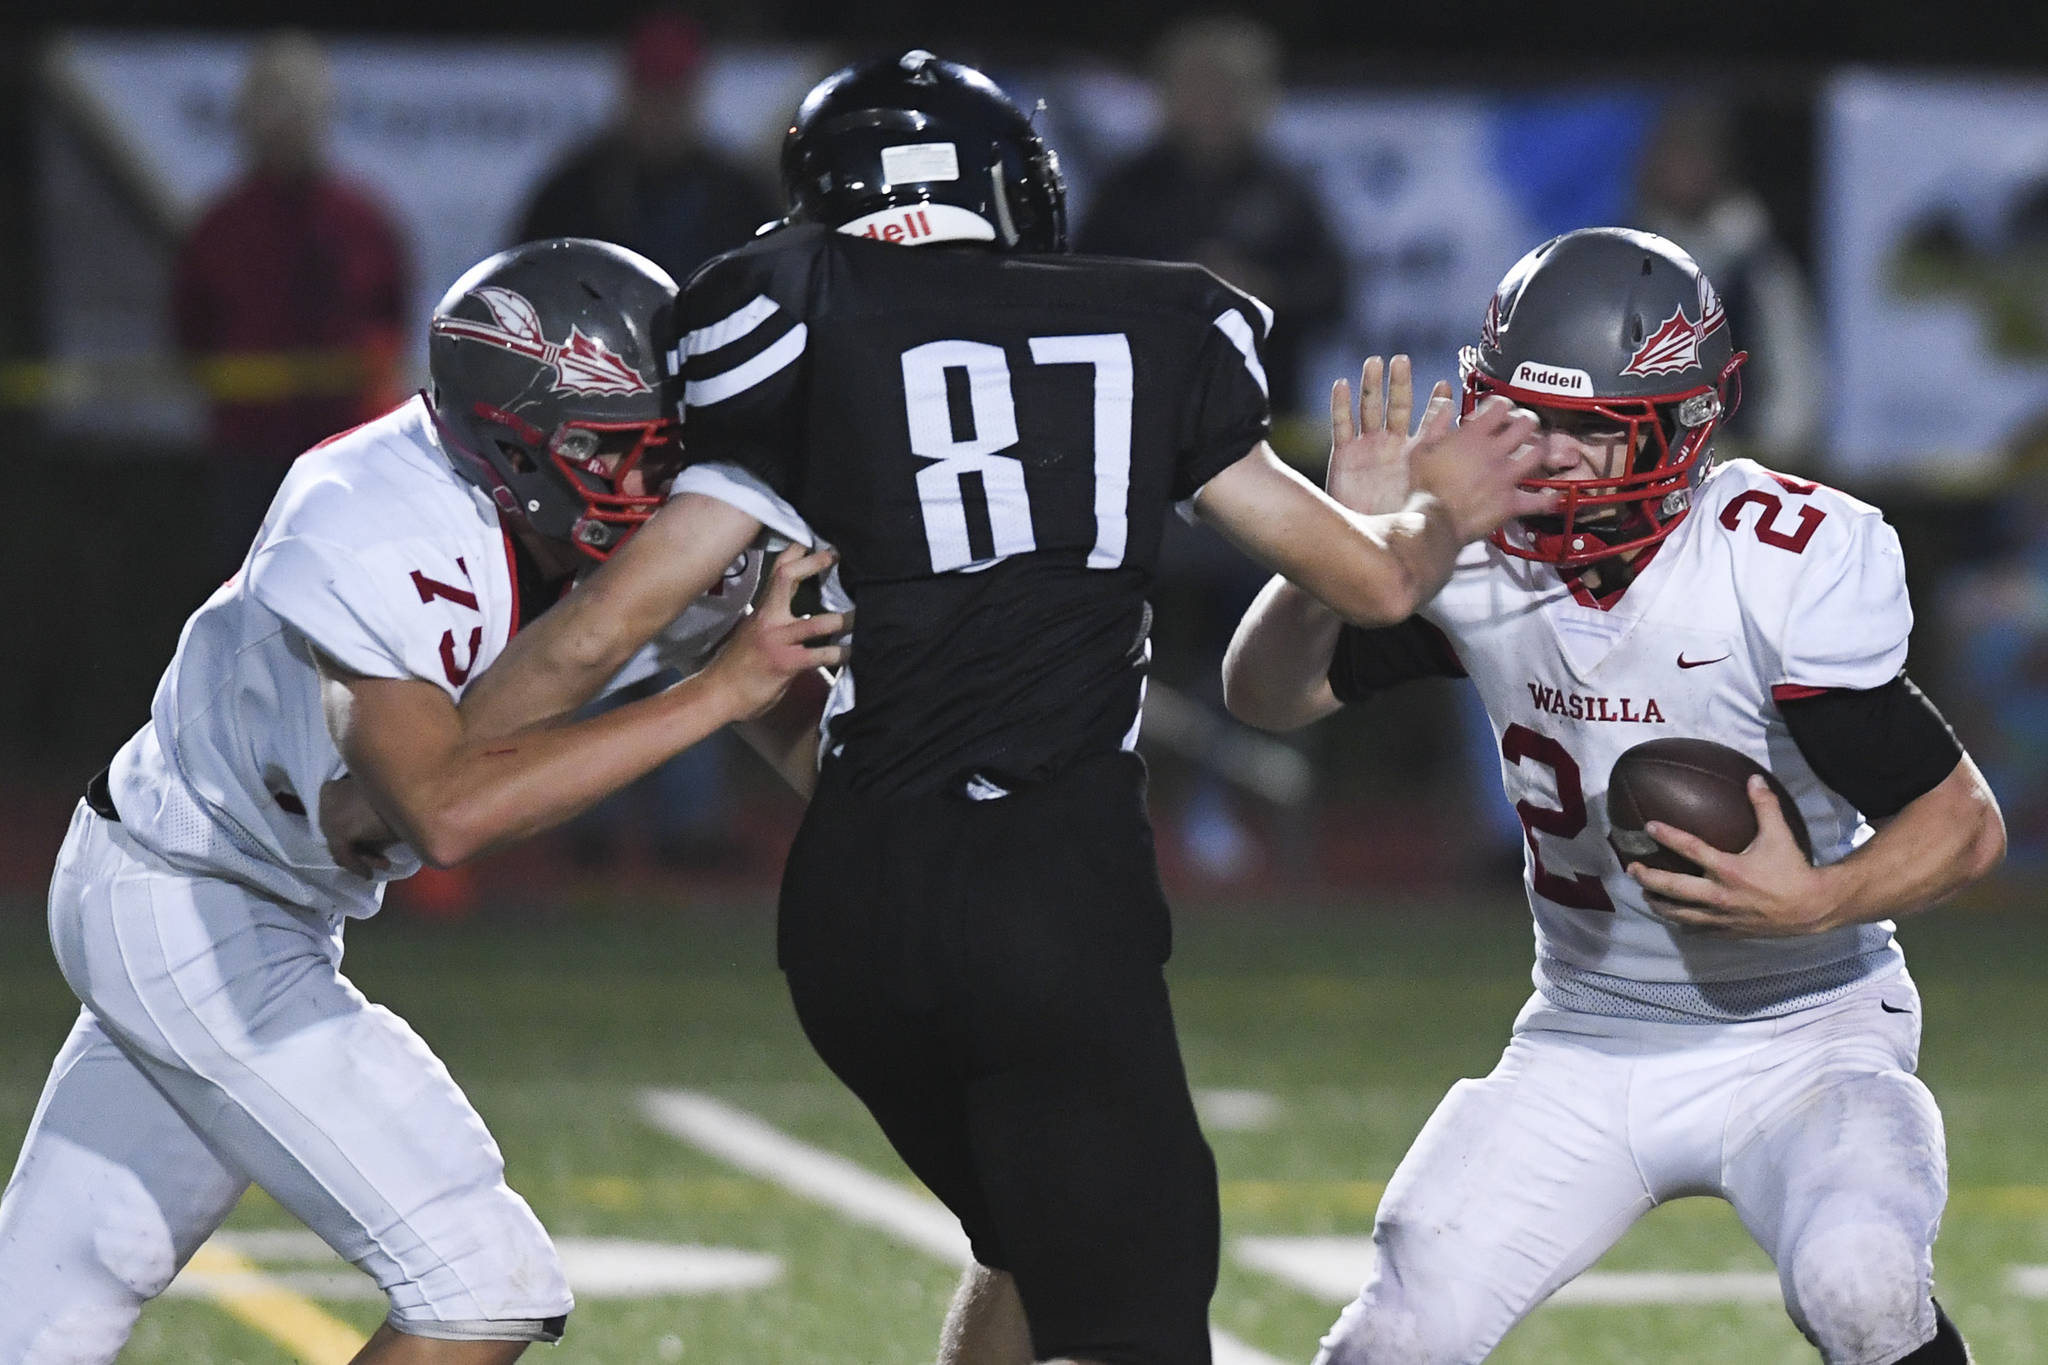 Juneau’s Cole Jensen, center, moves to sack Wasilla quarterback Colton Lindquist, right, despite blocking by Wasilla’s Andrew Devine in the second quarter at Adair-Kennedy Memorial Field on Friday, Sept. 6, 2019. Juneau won 63-0. (Michael Penn | Juneau Empire)